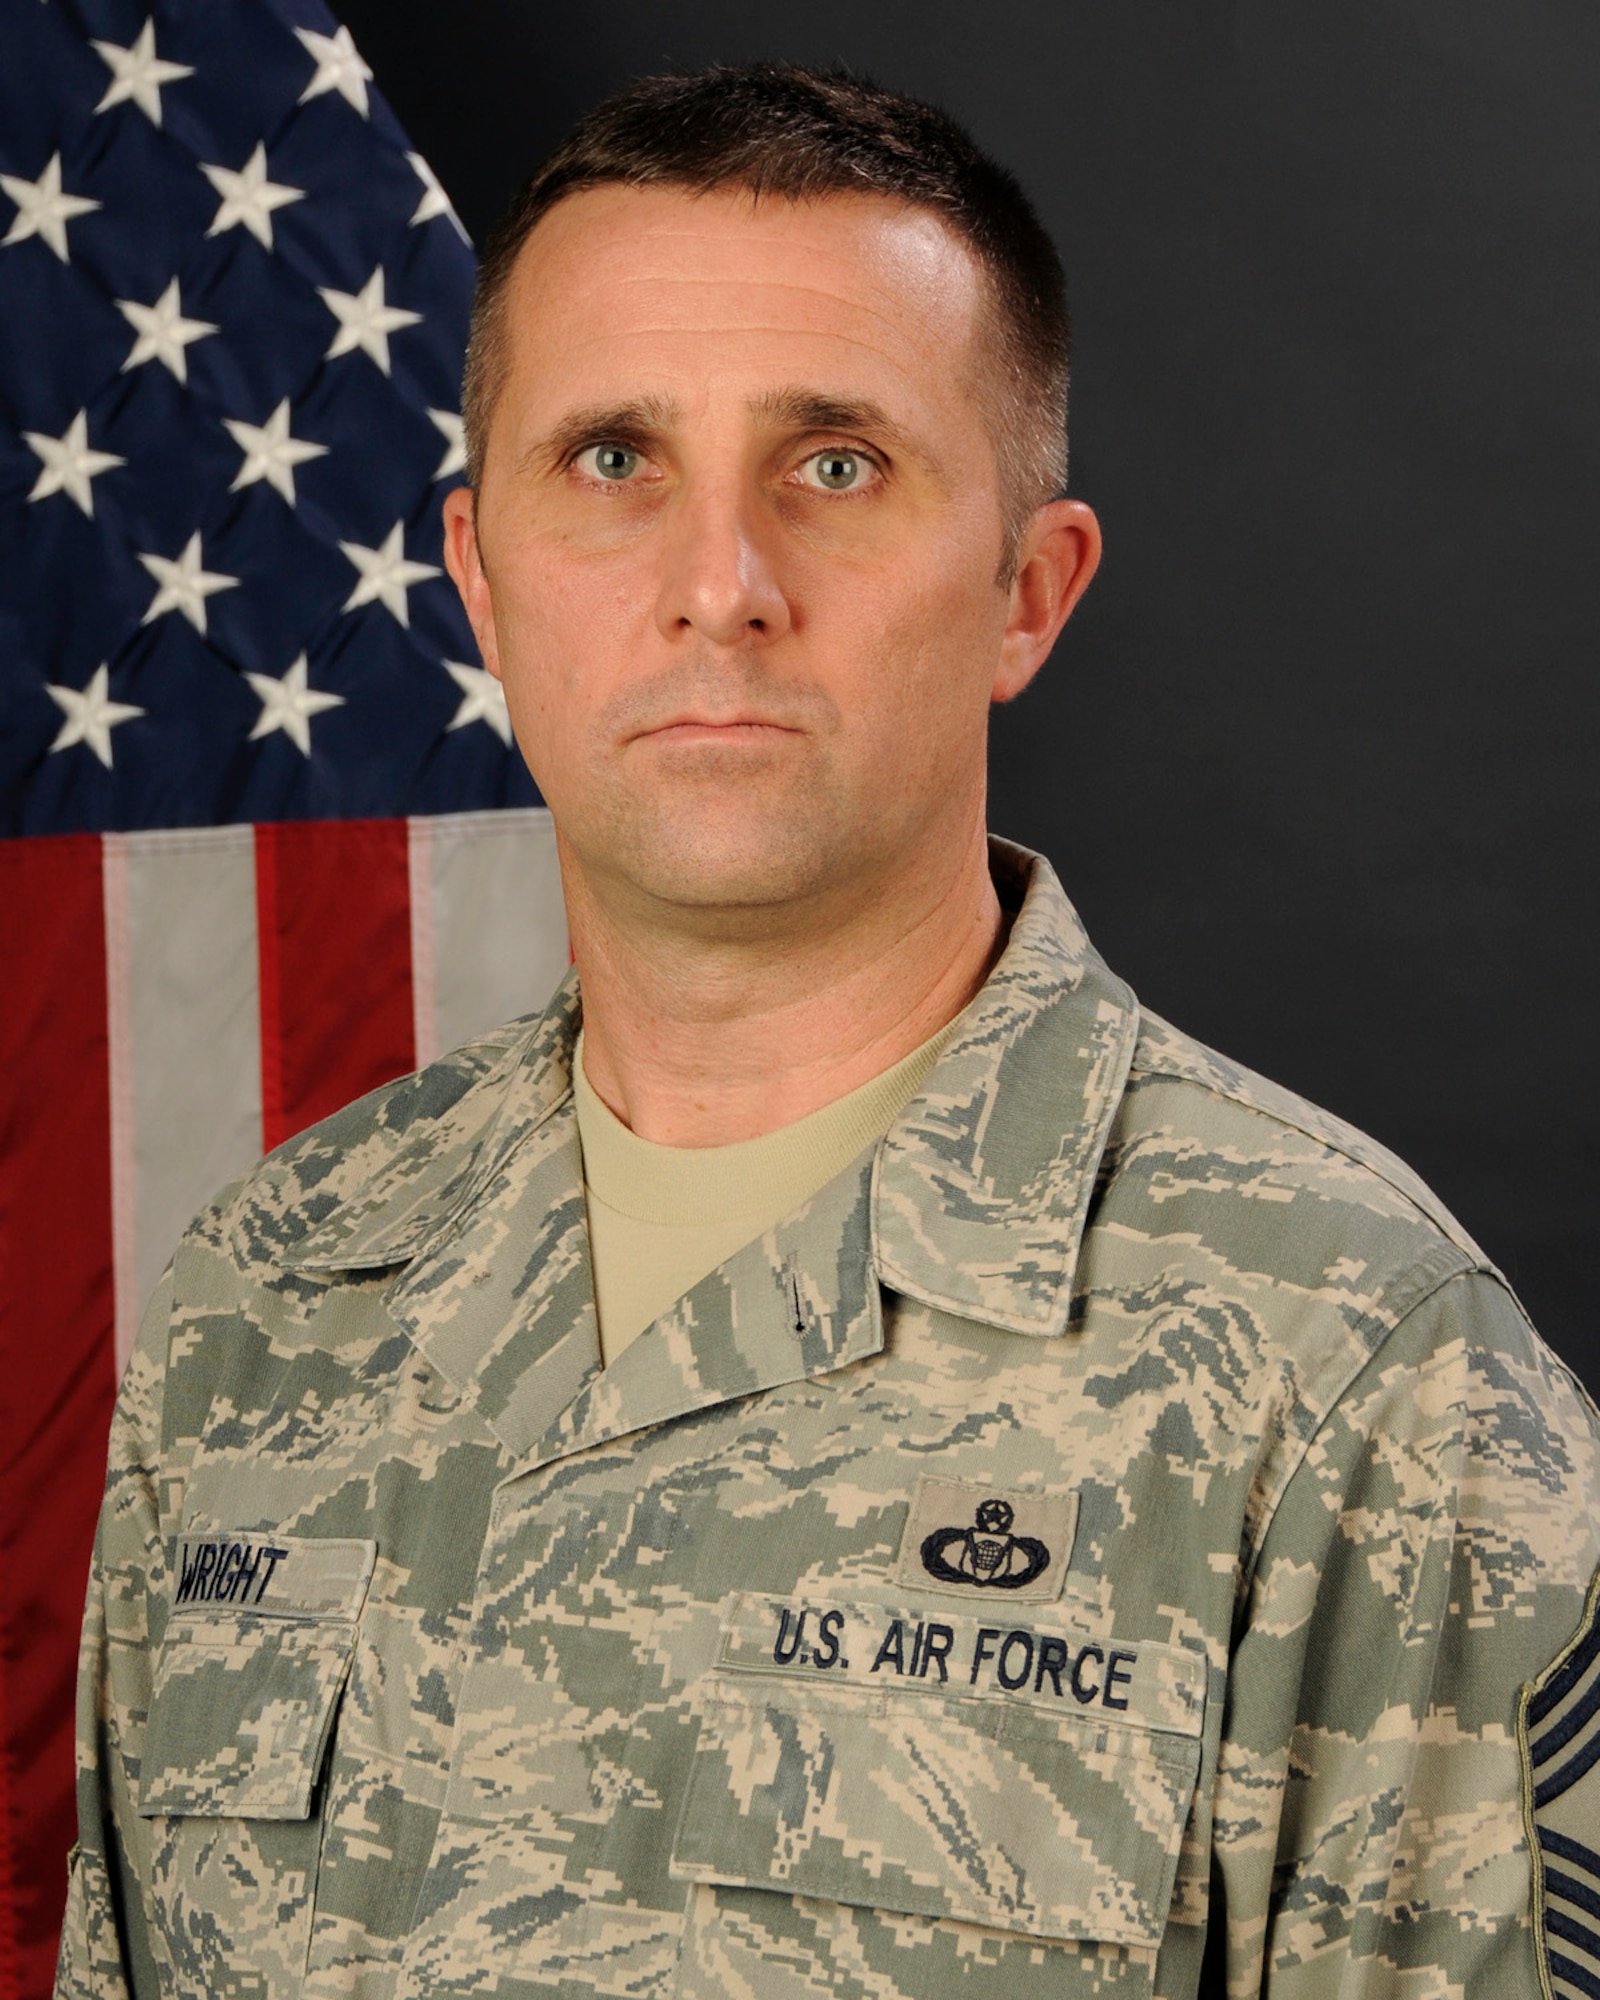 Chief Master Sgt. Robert Wright, with the 169th Operations Support Flight at McEntire Joint National Guard Base, S.C., poses for his official portrait Jan. 11, 2013.
(National Guard photo by Tech. Sgt. Caycee Watson/Released)
